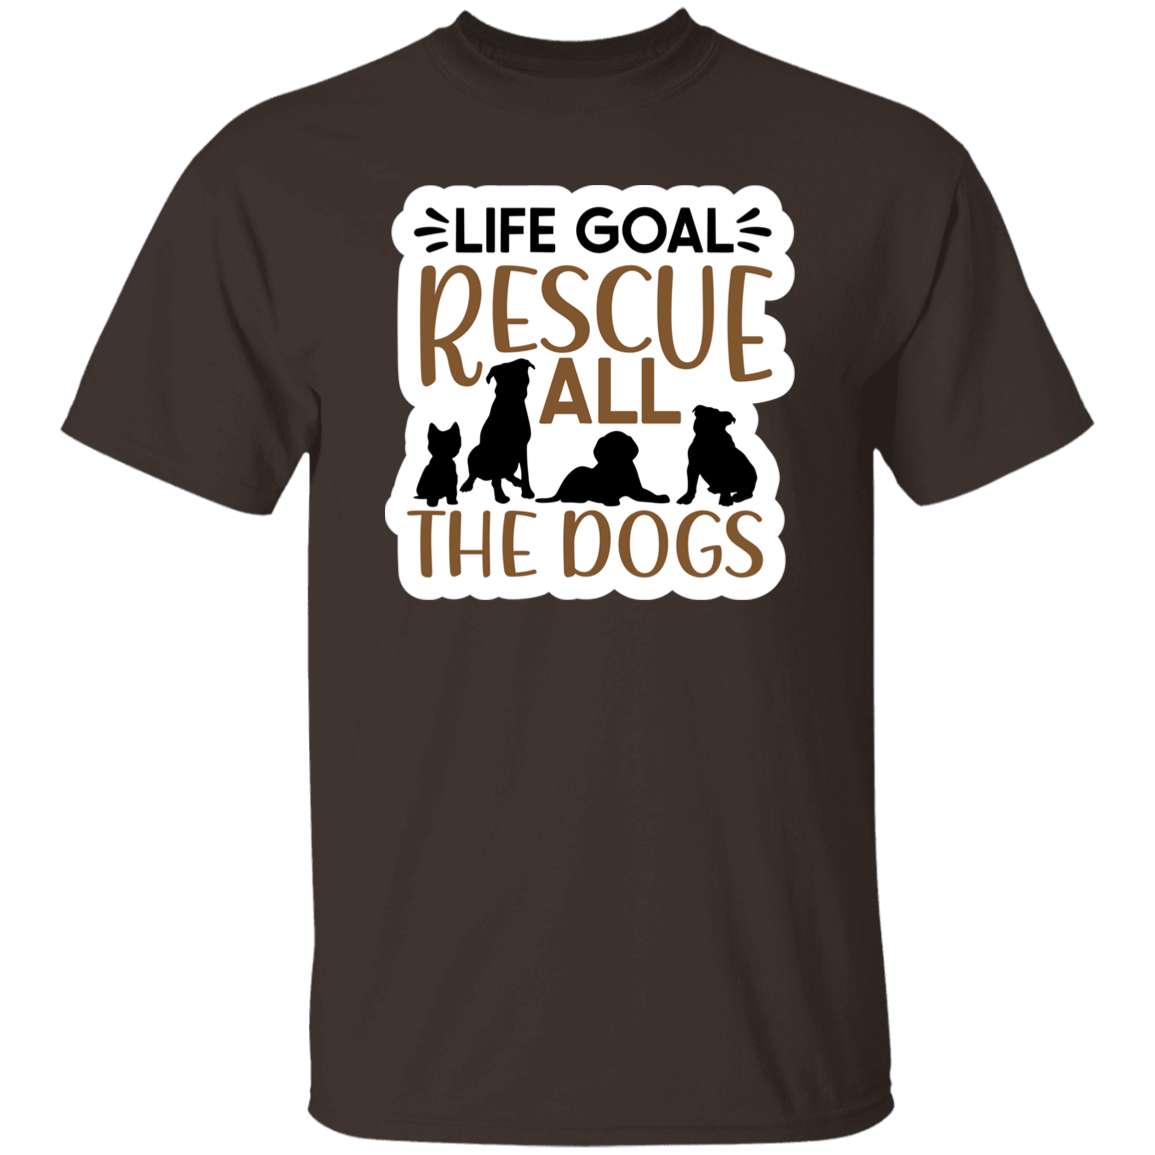 Life Goal Rescue All the Dogs T-Shirt